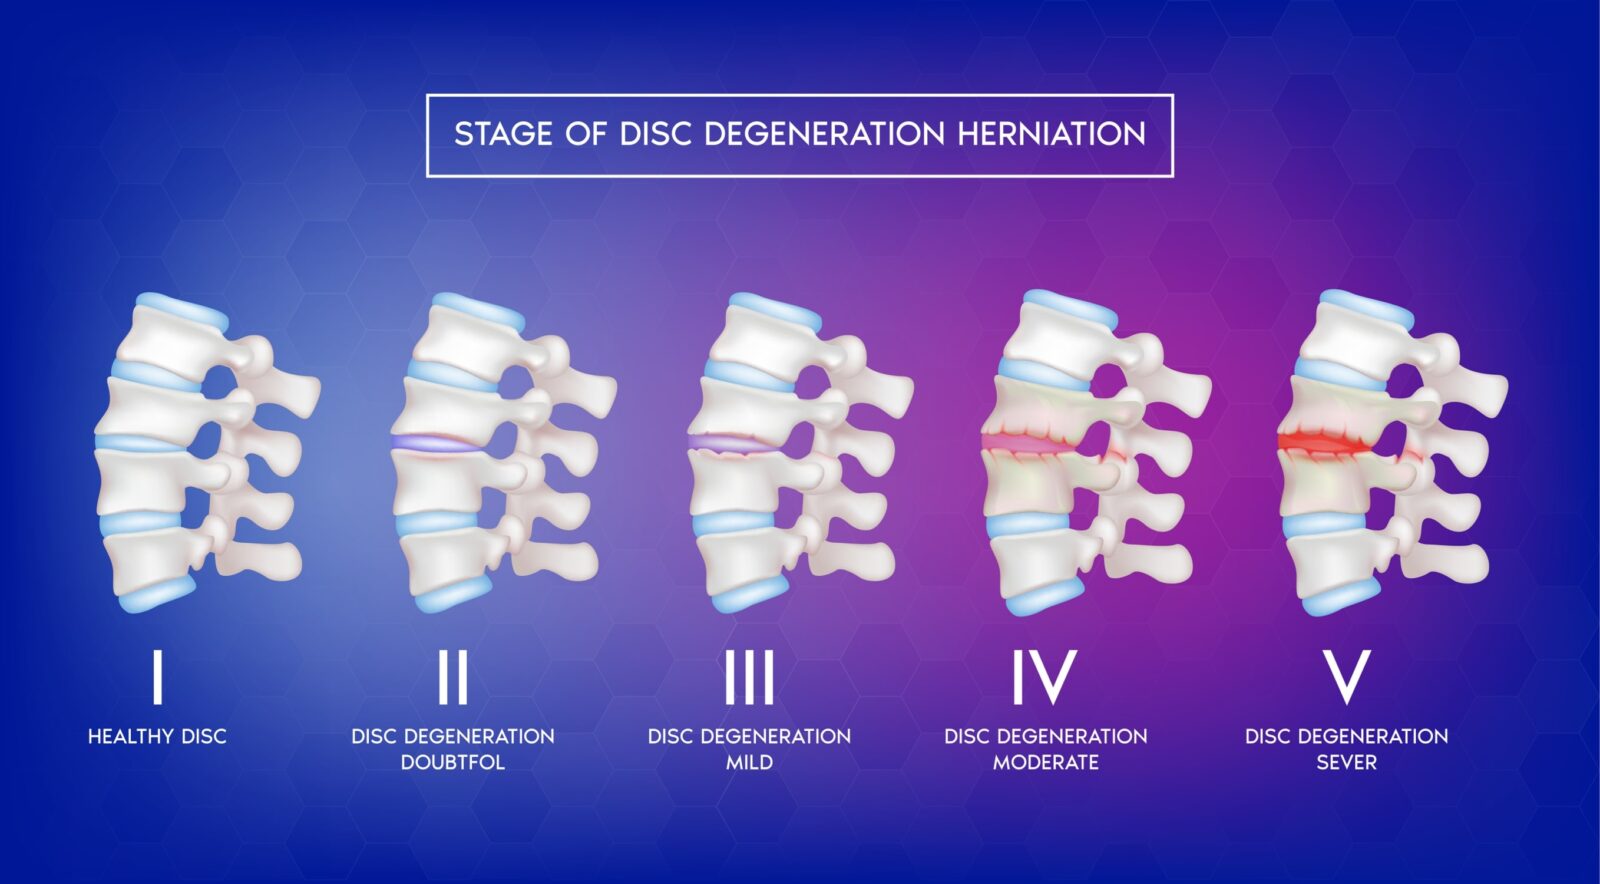 stages of disc degeneration
